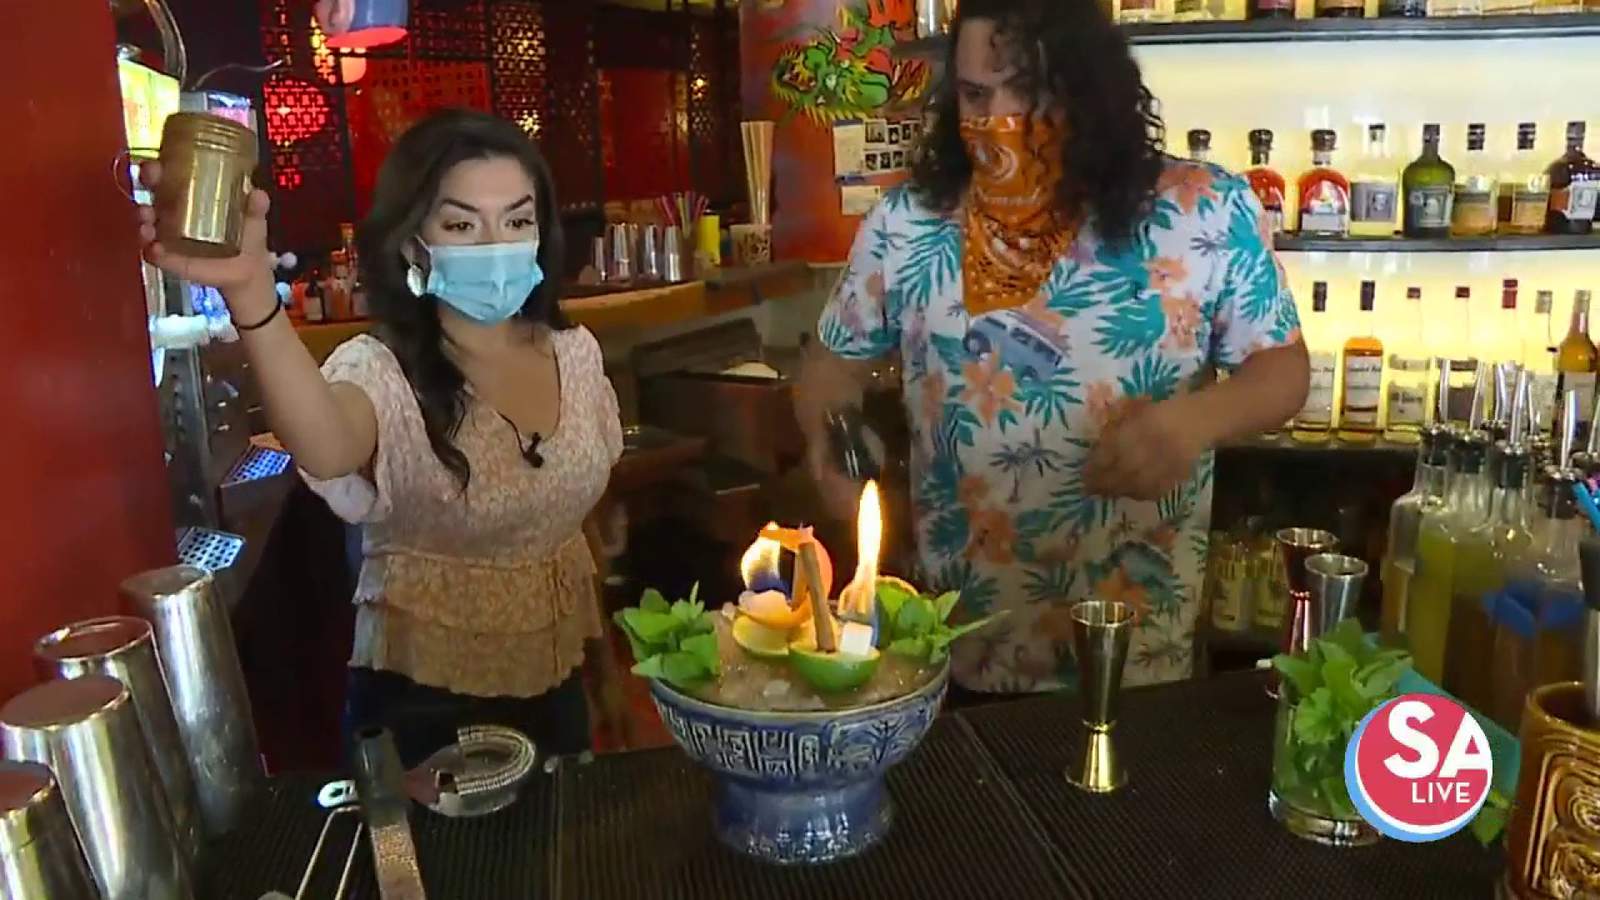 Tiki-inspired cocktails at Hot Joy = a flaming experience